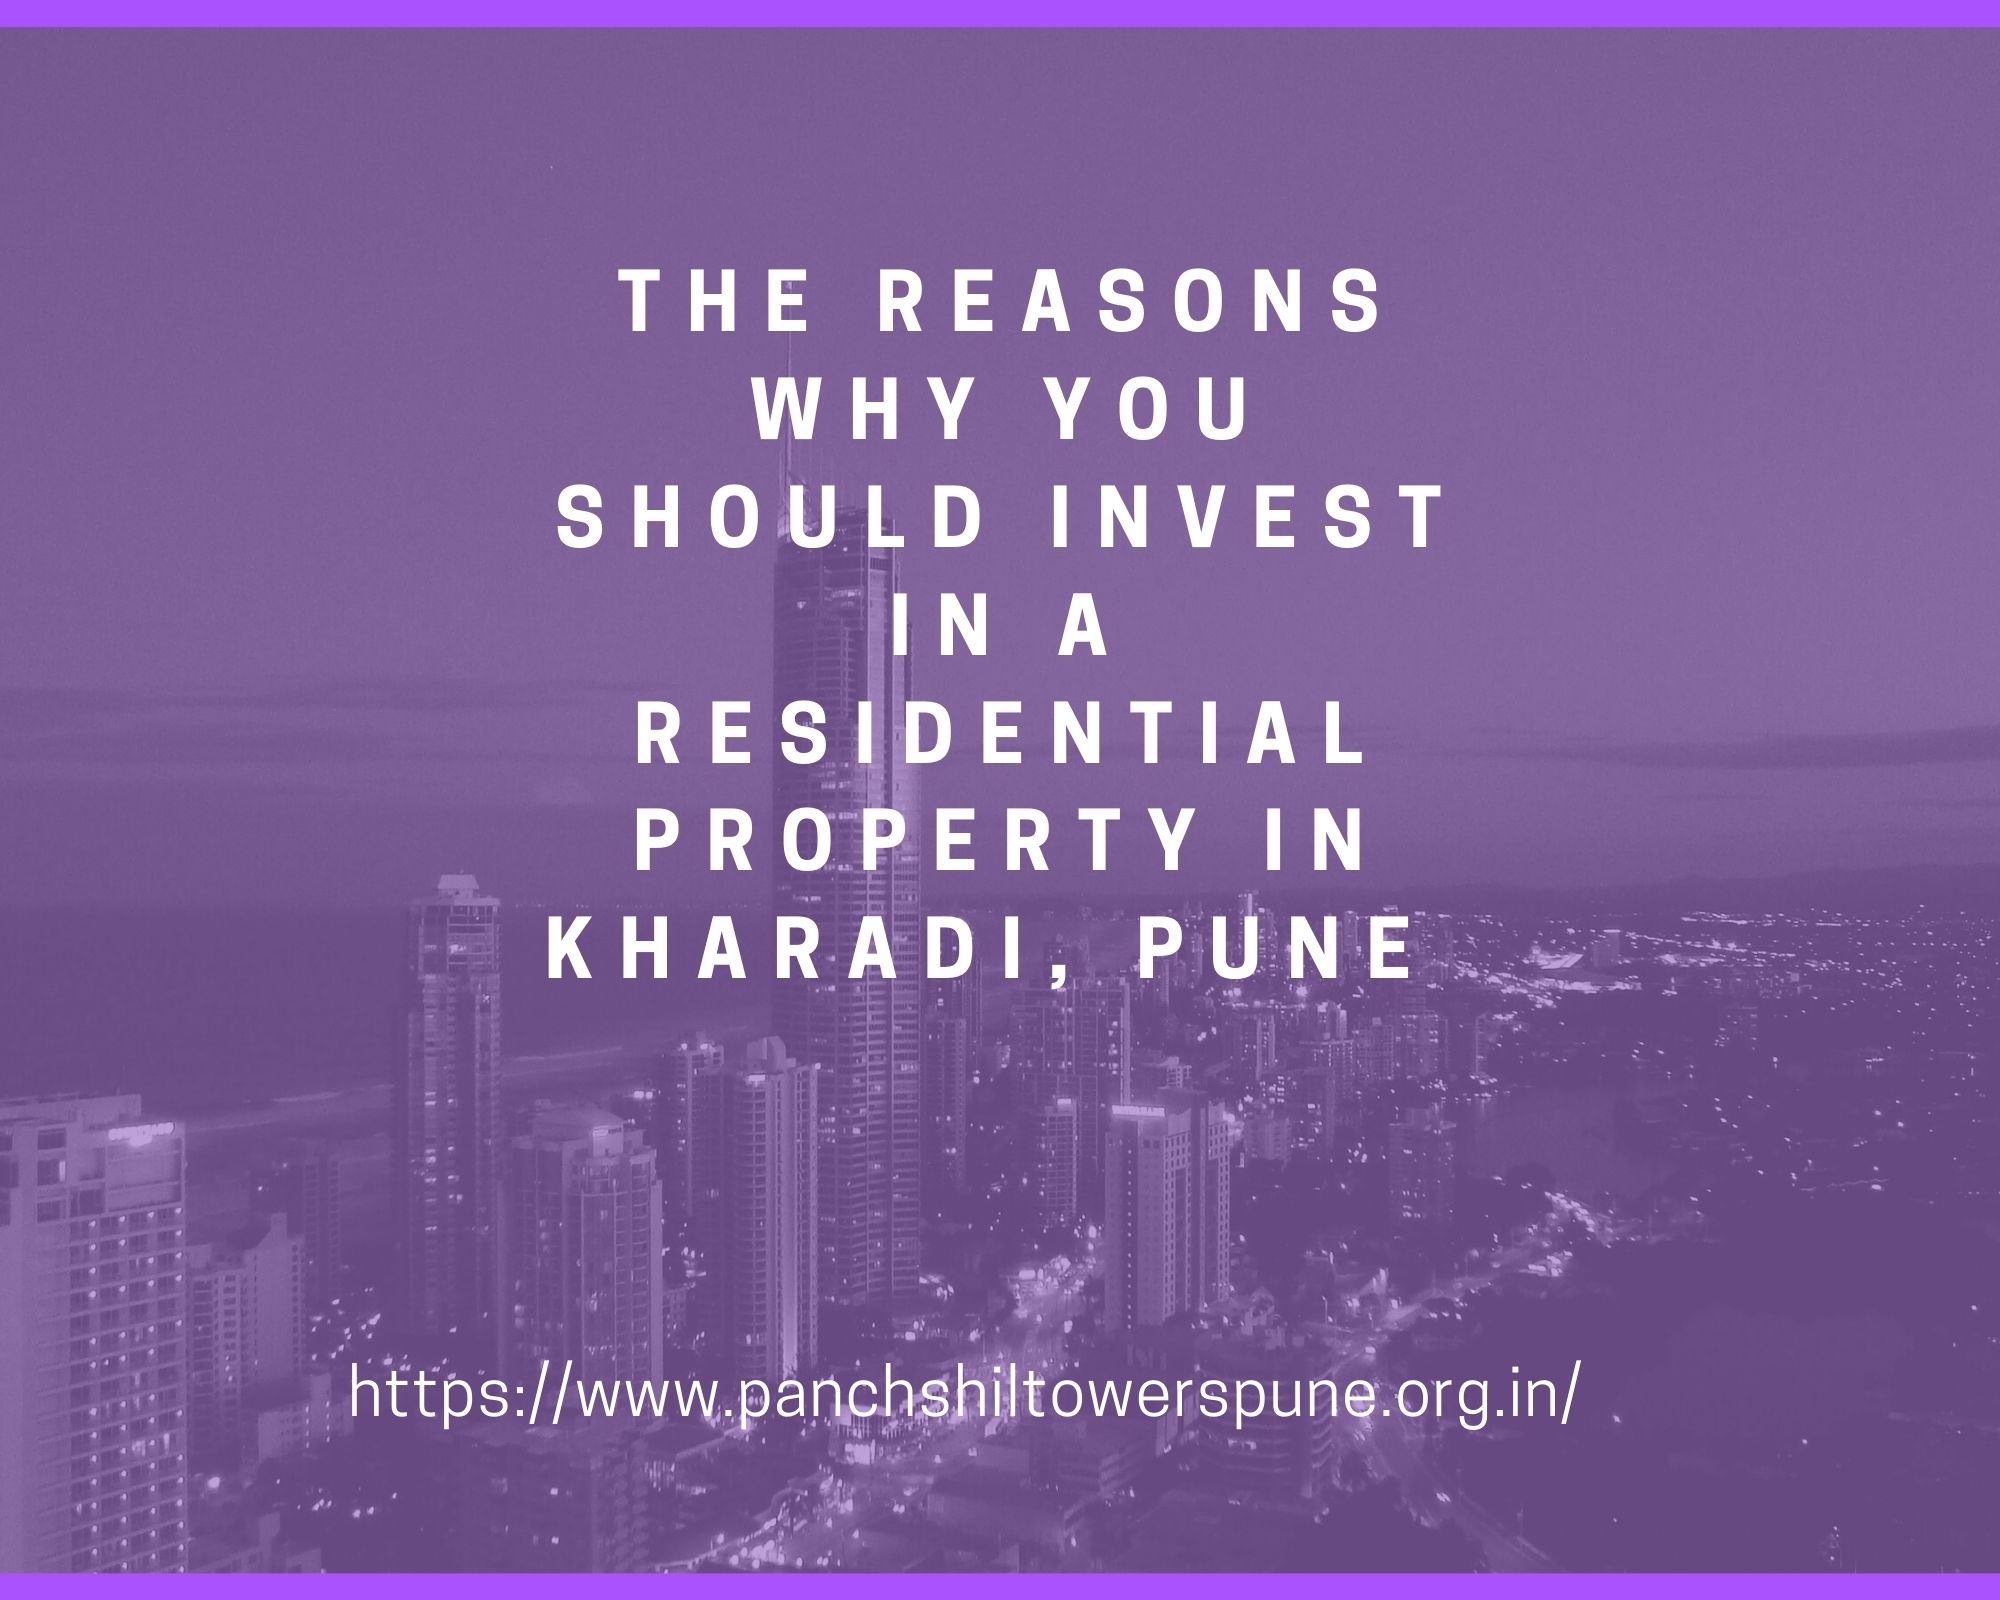 The reasons why you should invest in a residential property in Kharadi, Pune